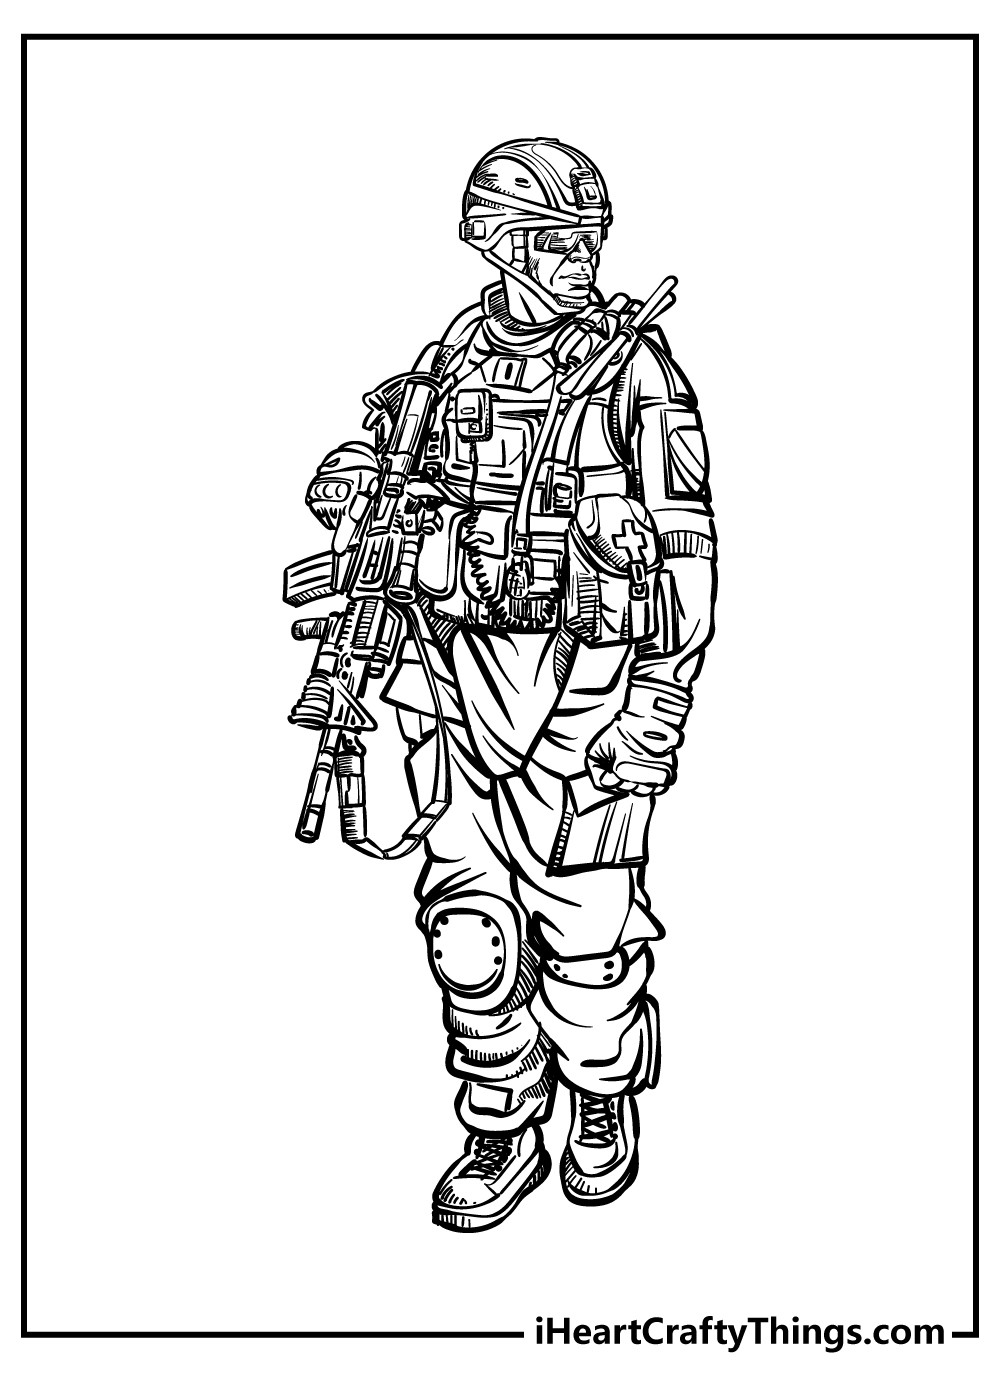 Army Coloring Pages for preschoolers free printable